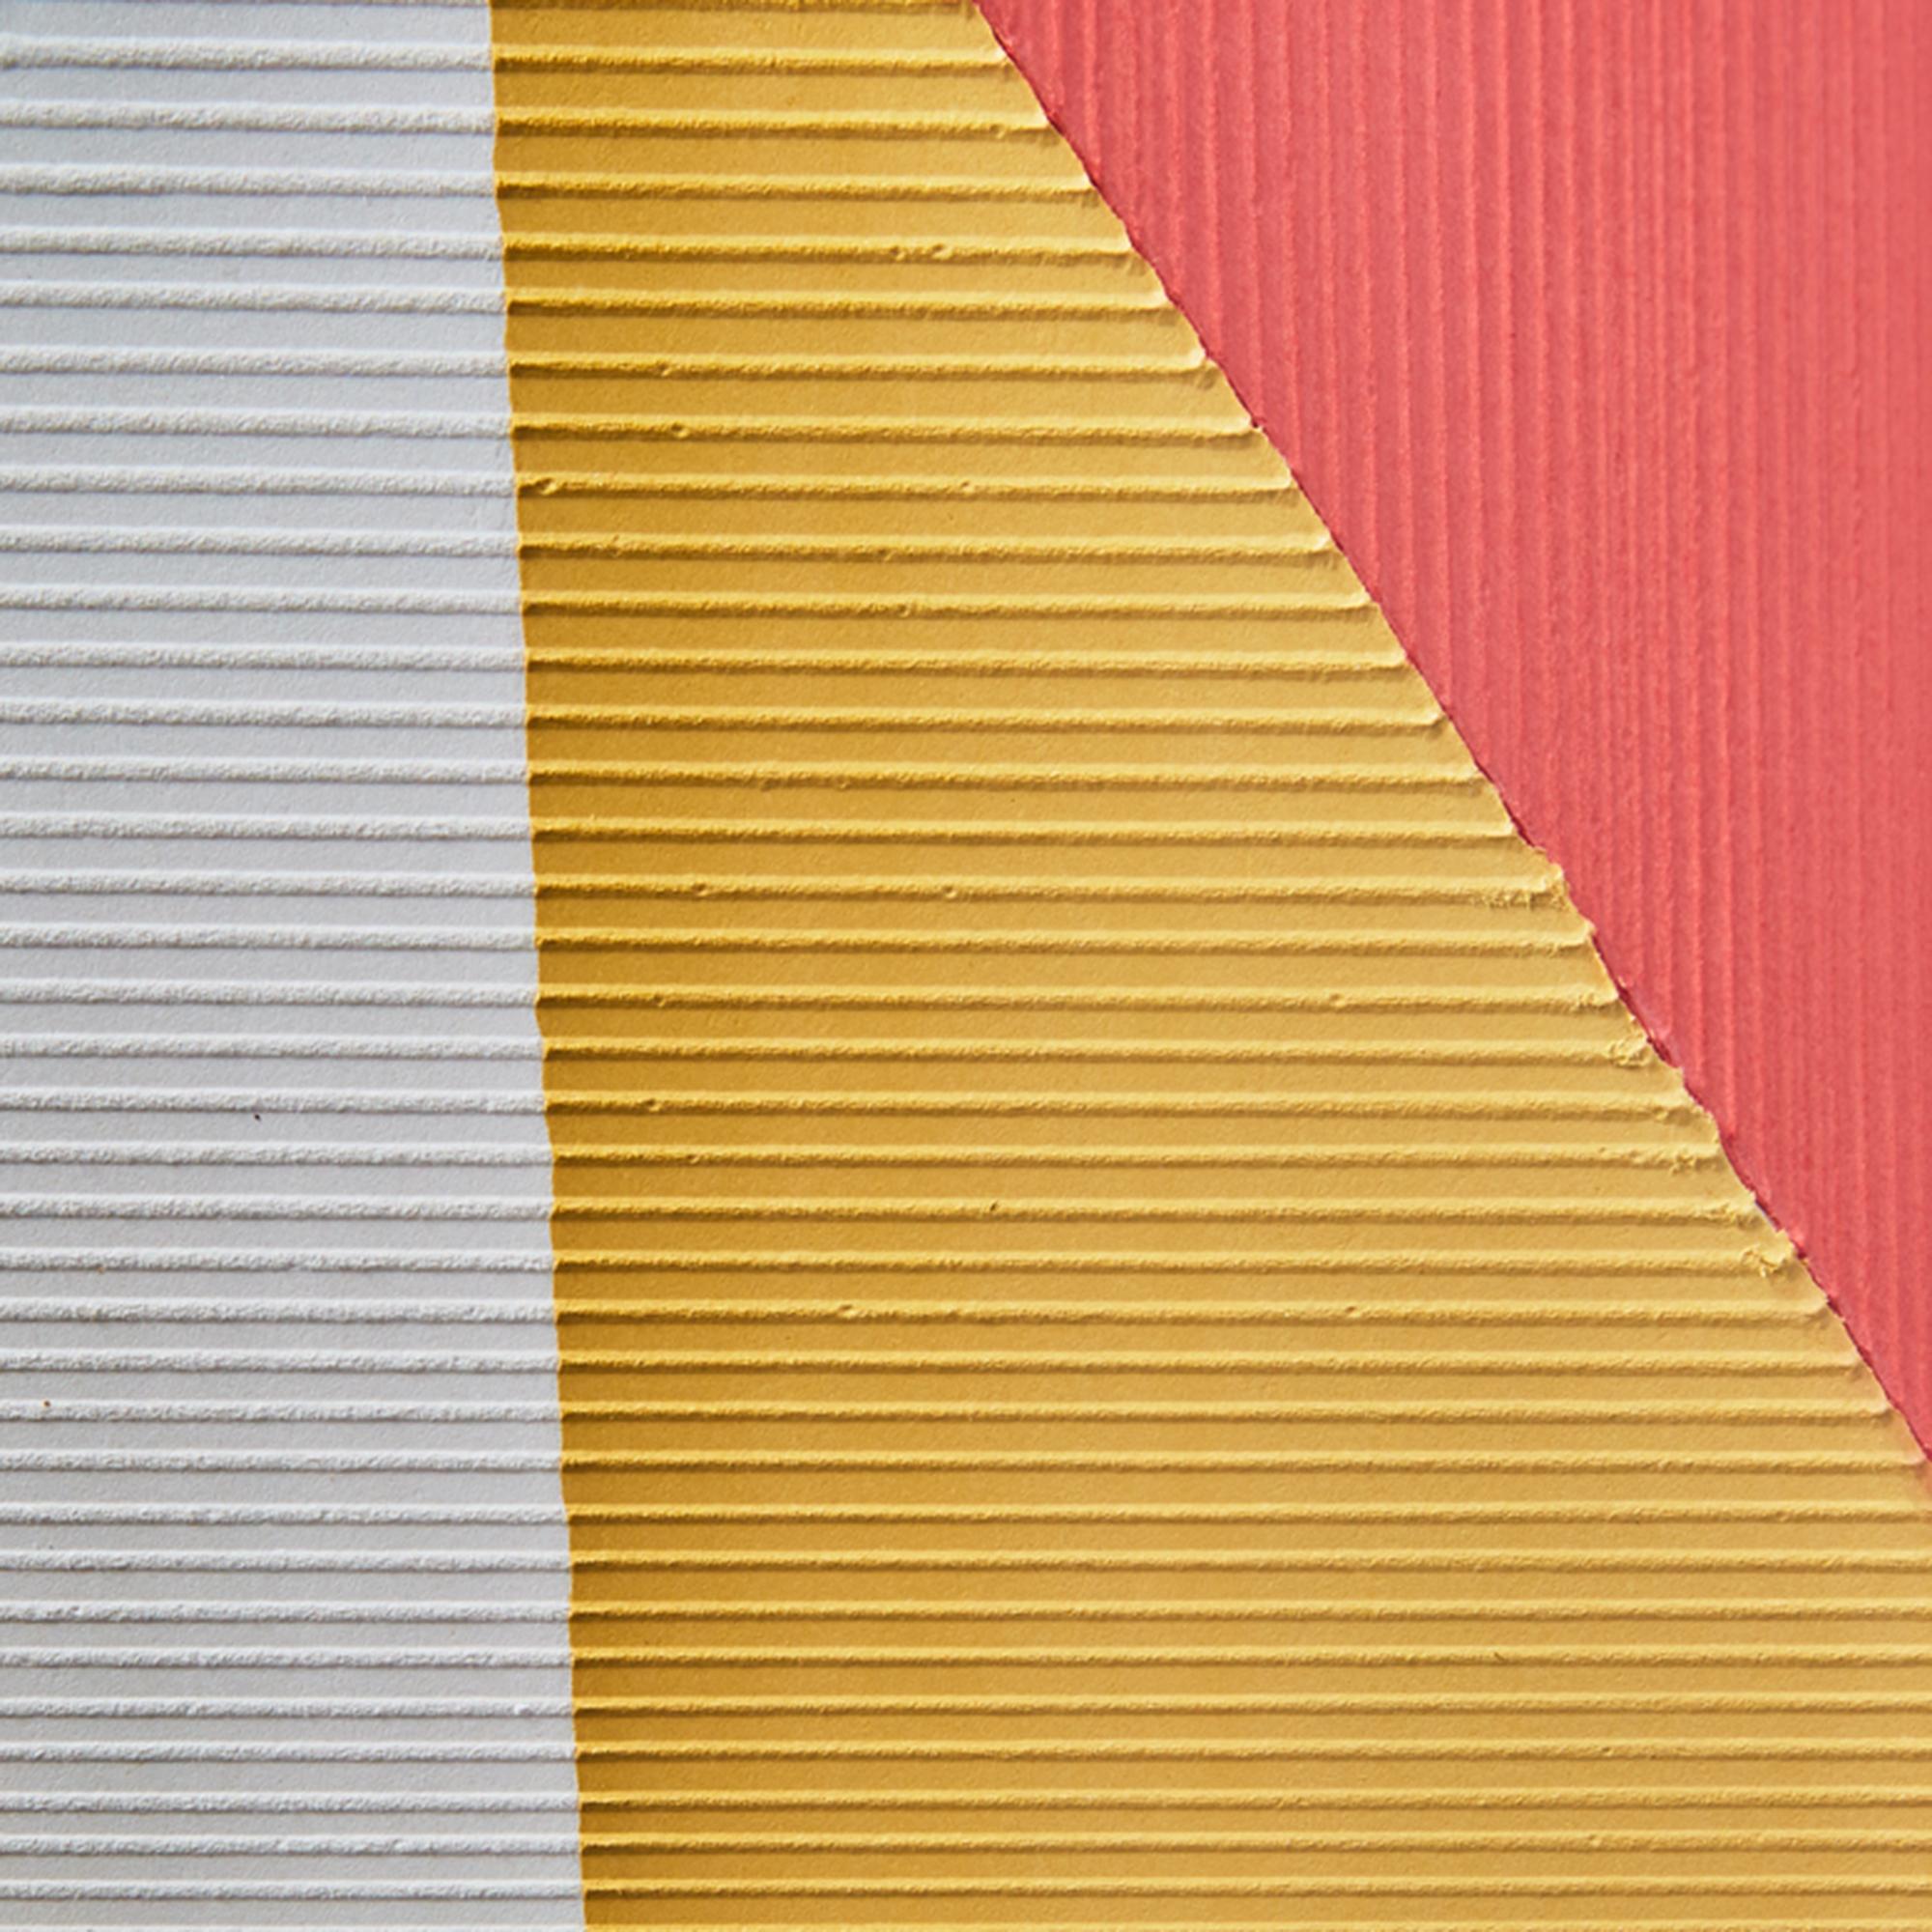 Color Pyramids, 3-D Screen Print on folded paper - Beige Abstract Print by Yaacov Agam